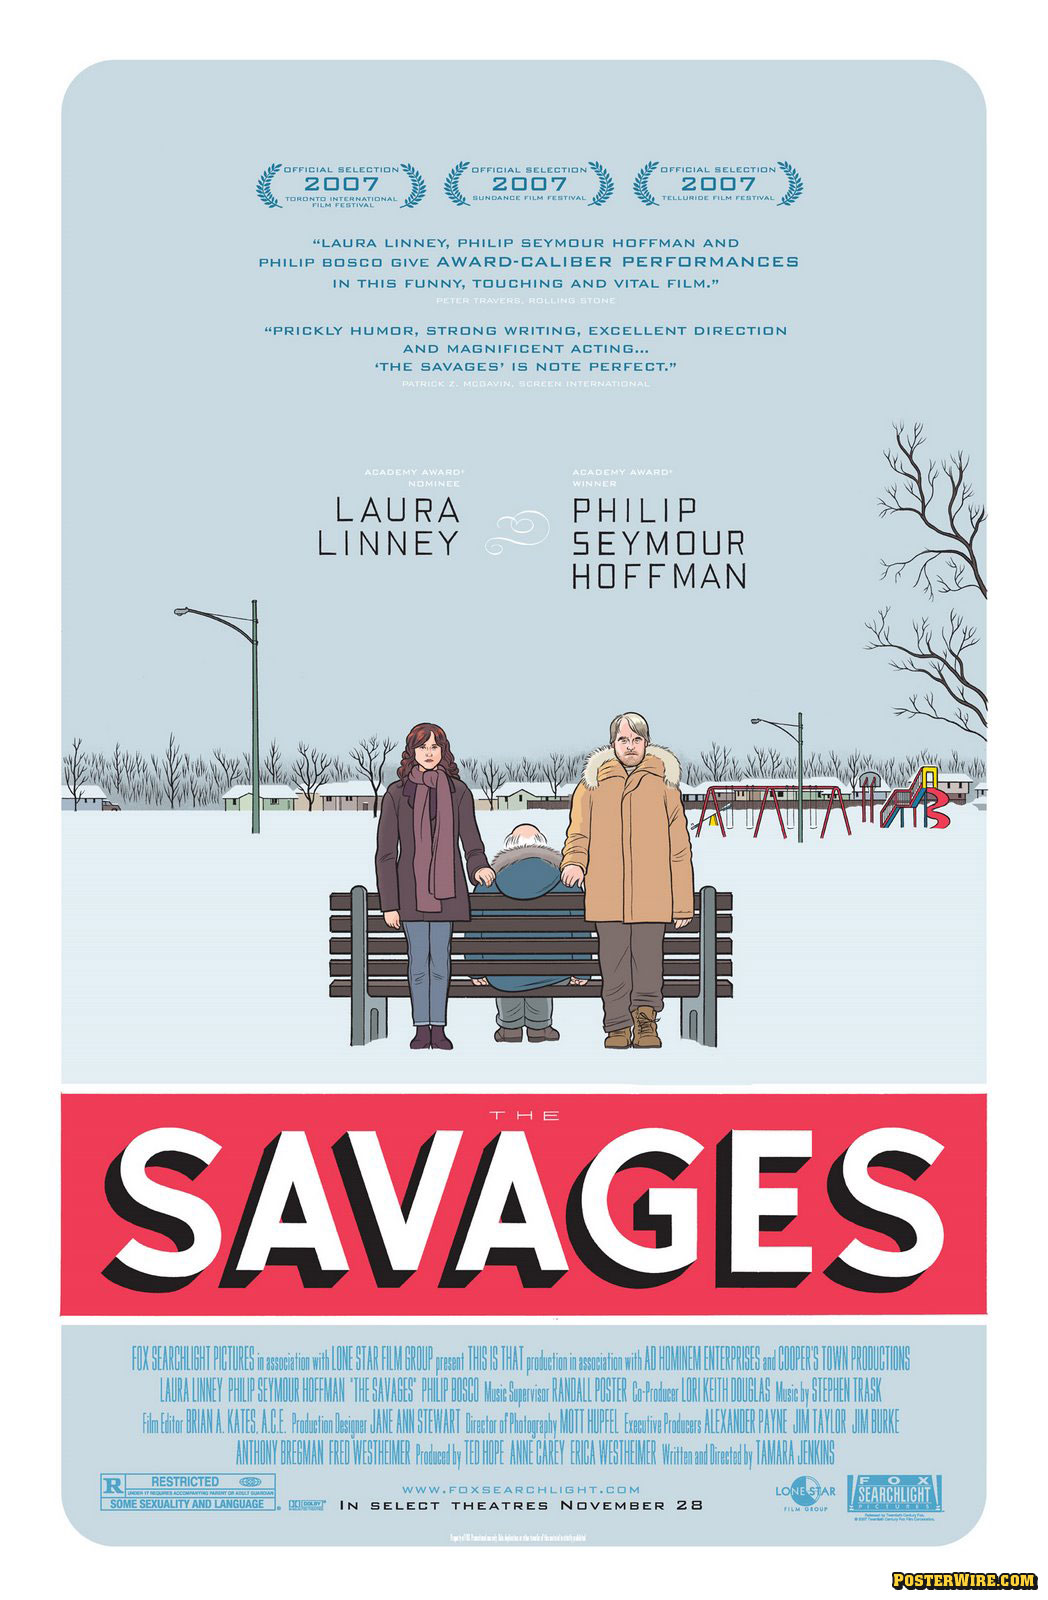 The Savages movie poster